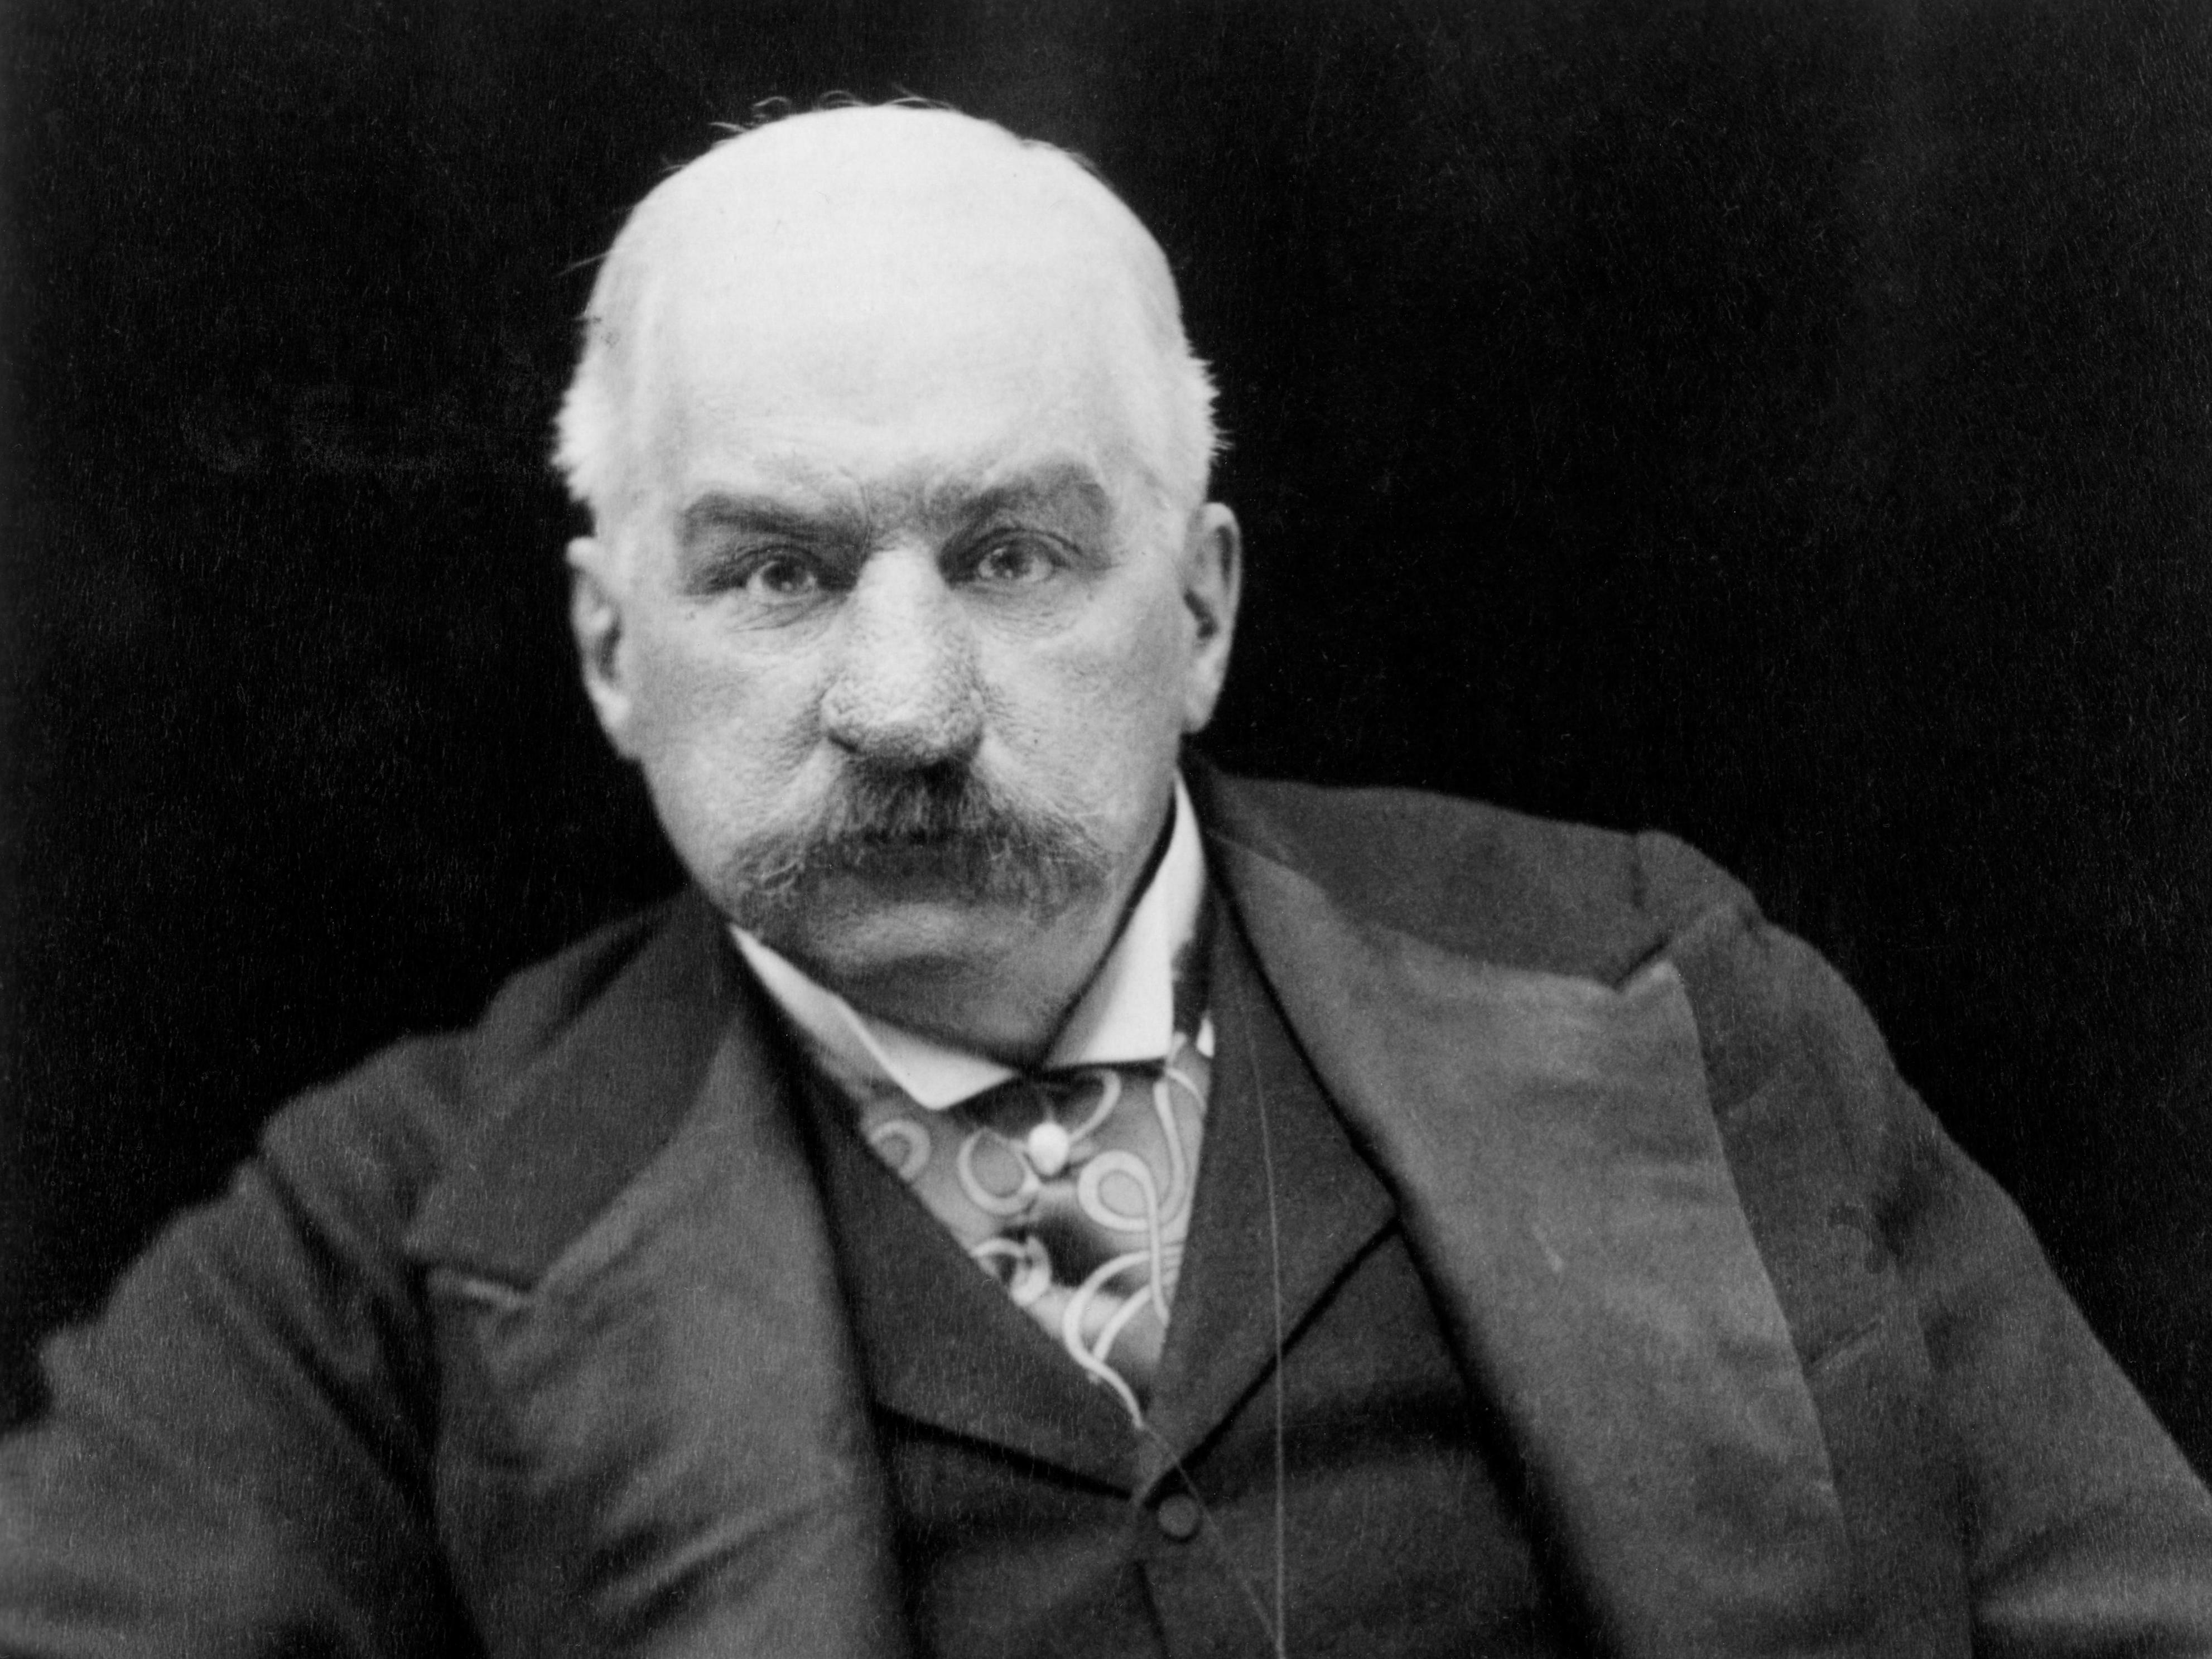 <p>"I've never been able to find an authoritative 1912 source explaining the exact reason why J. P. Morgan cancelled his passage on the Titanic," <a href="https://www.reuters.com/article/factcheck-titanic-conspiracy/corrected-fact-check-j-p-morgan-did-not-sink-the-titanic-to-push-forward-plans-for-the-u-s-federal-reserve-idUSL1N2LF18G"> Titanic expert George Behe told Reuters in 2021.</a> Some posited reasons were that he was in bad health, or that he was having issues in customs due to his art collection.</p><p>However, we do know that Morgan, the co-founder of General Electric, International Harvester, and US Steel, was also the founder of the International Mercantile Marine, which in turn owned White Star Line. <a href="https://www.washingtonpost.com/news/retropolis/wp/2018/08/04/how-j-p-morgan-didnt-sink-the-titanic-and-other-qanon-conspiracy-theories-debunked/">According to the Washington Post,</a> he was even on hand to witness its 1911 launch.</p><p>"Monetary losses amount to nothing in life," <a href="https://alumni.jpmorganchase.com/alumni/anon/news/details?id=464">Morgan said to a New York Times reporter after the sinking</a>. "It is the loss of life that counts. It is that frightful death."</p>